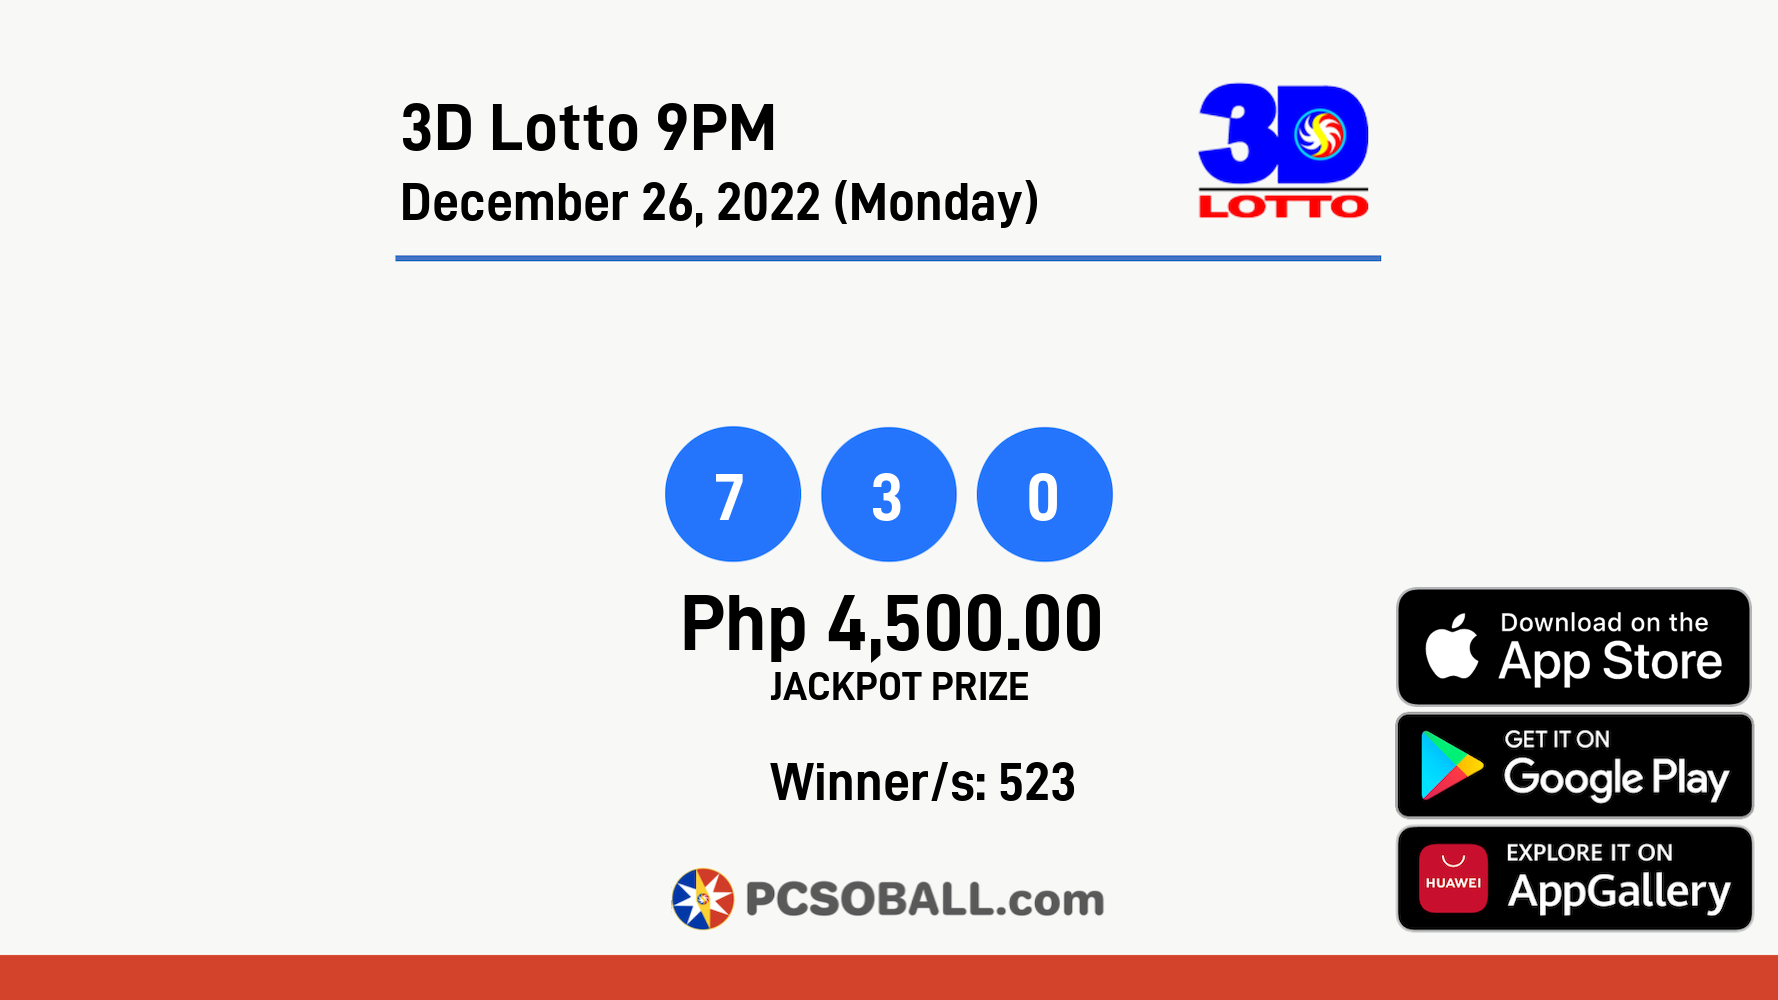 3D Lotto 9PM December 26, 2022 (Monday) Result